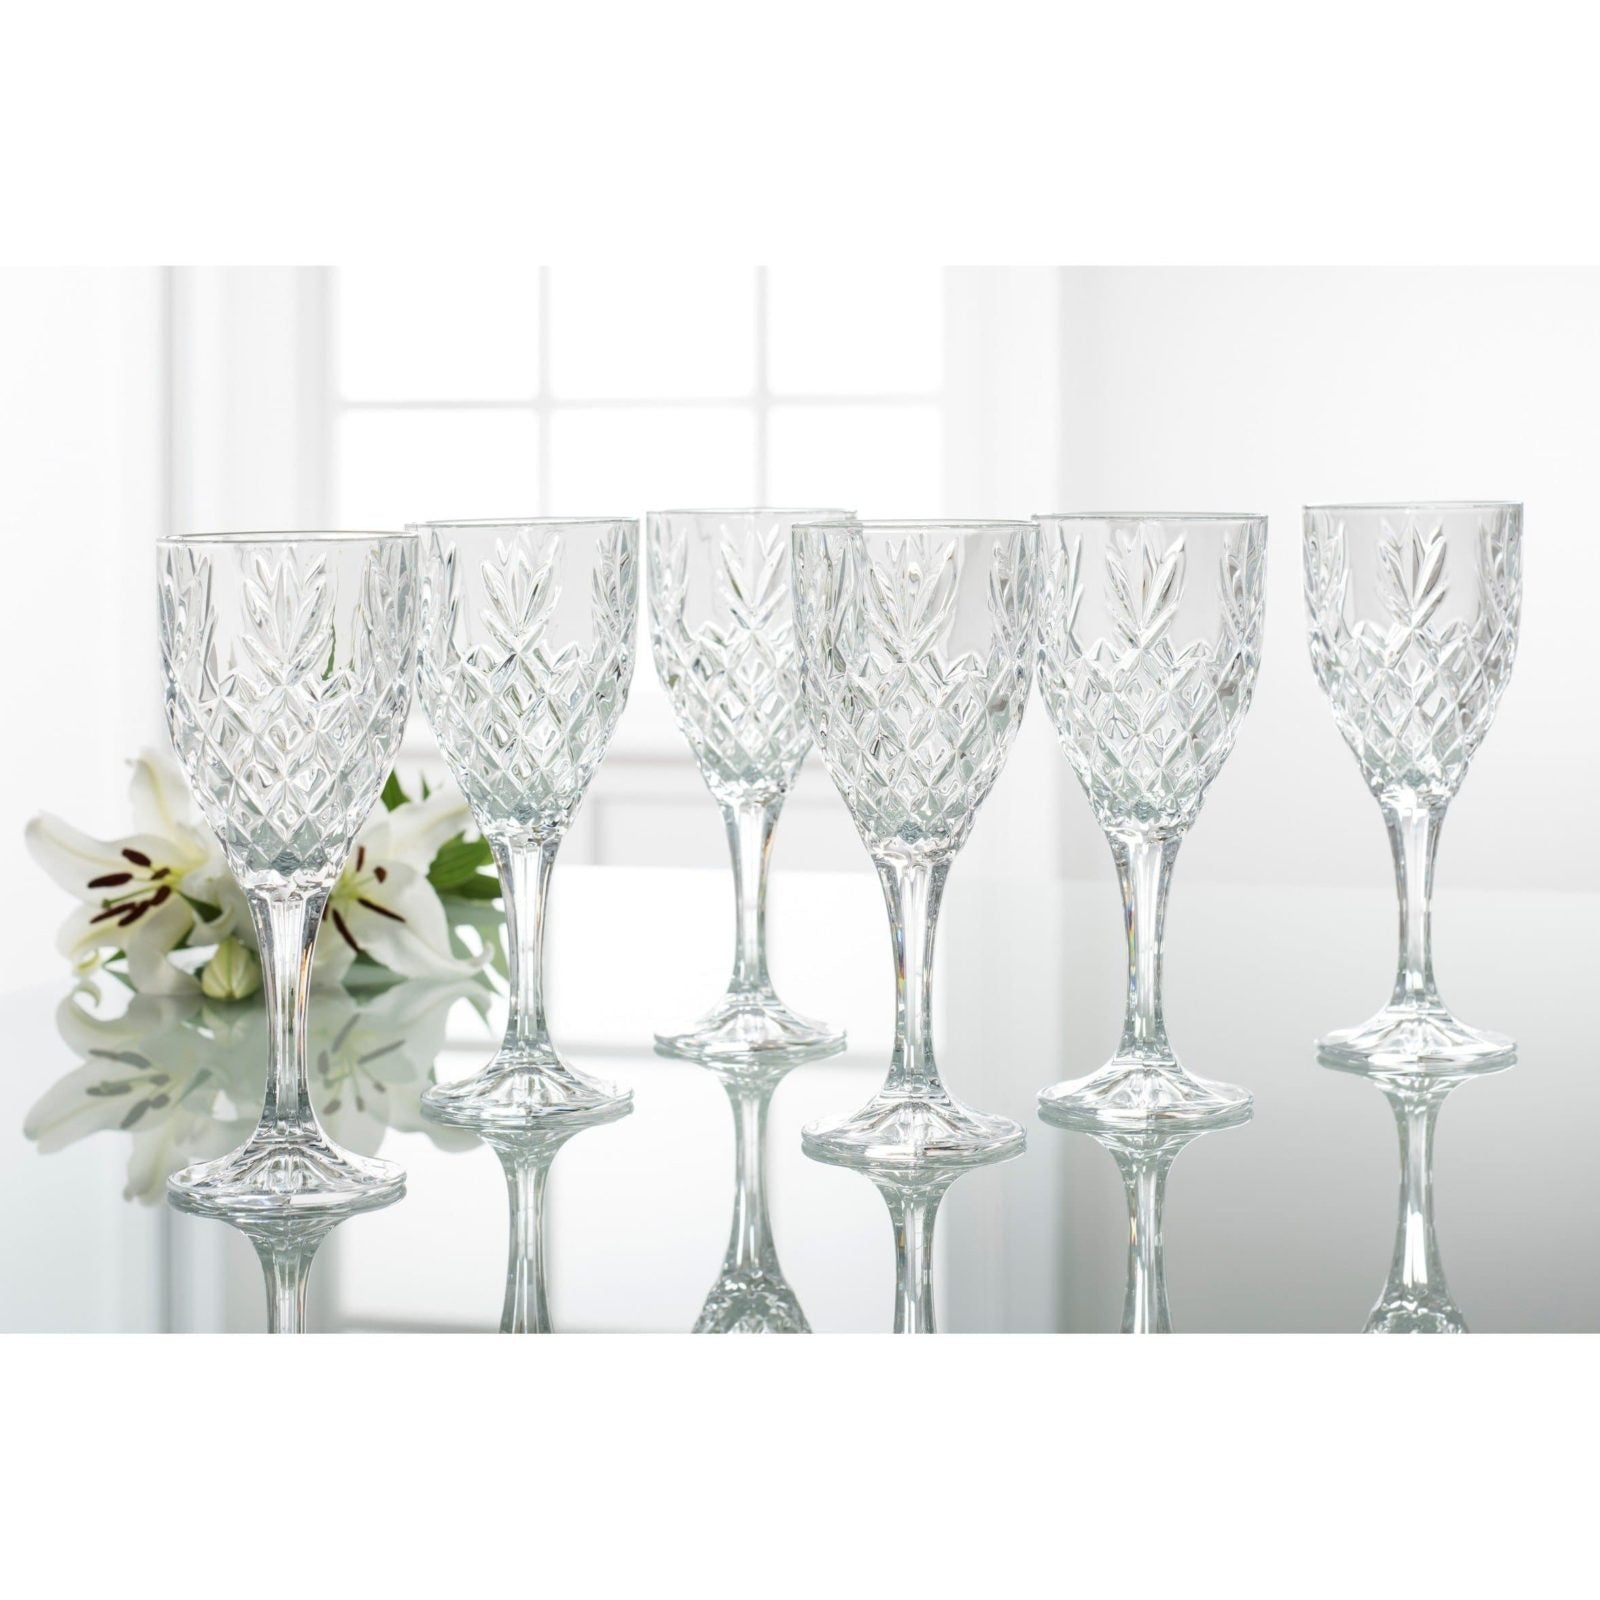 Galway Crystal Renmore Goblets set of 6 – Cois na hAbhann